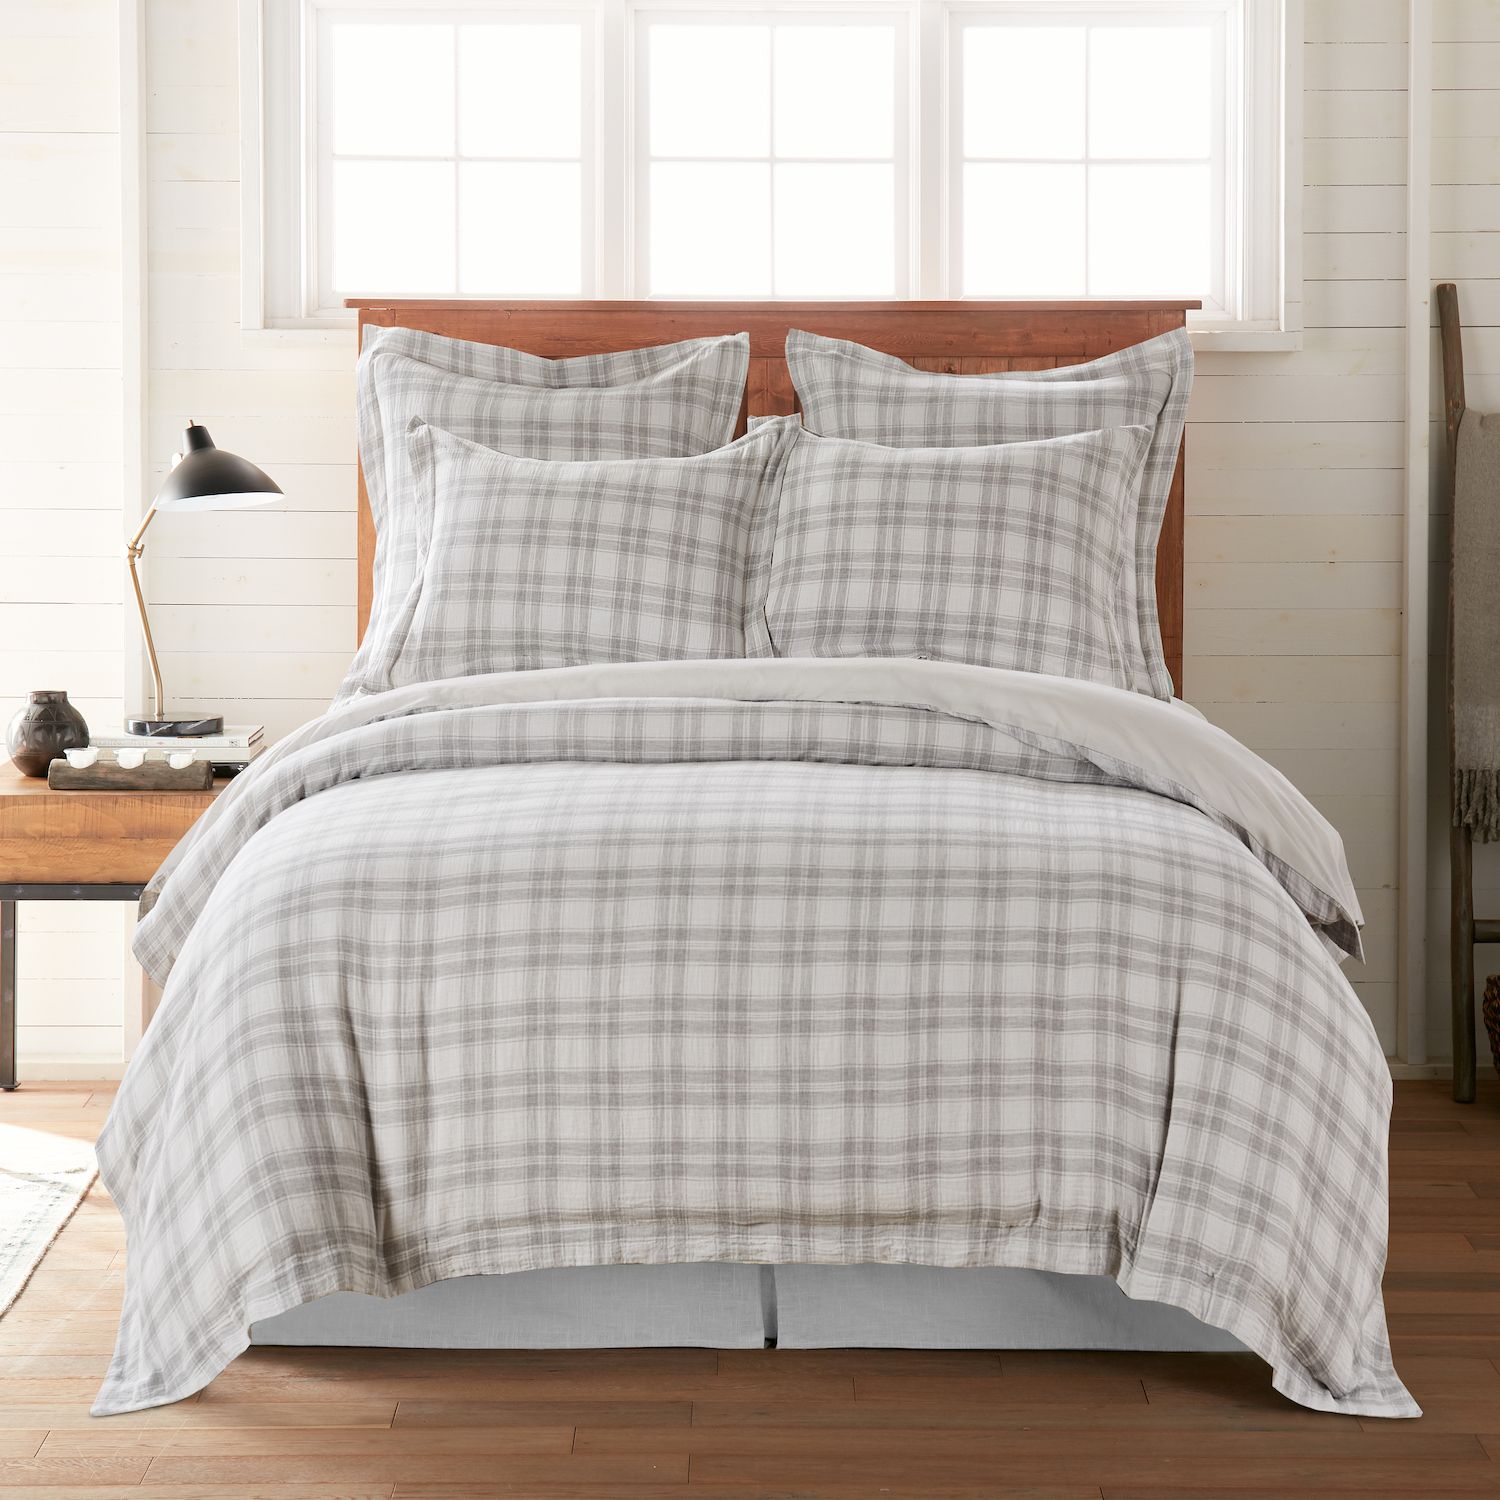 Image for Levtex Home Macallister Plaid Duvet Cover Set with Shams at Kohl's.